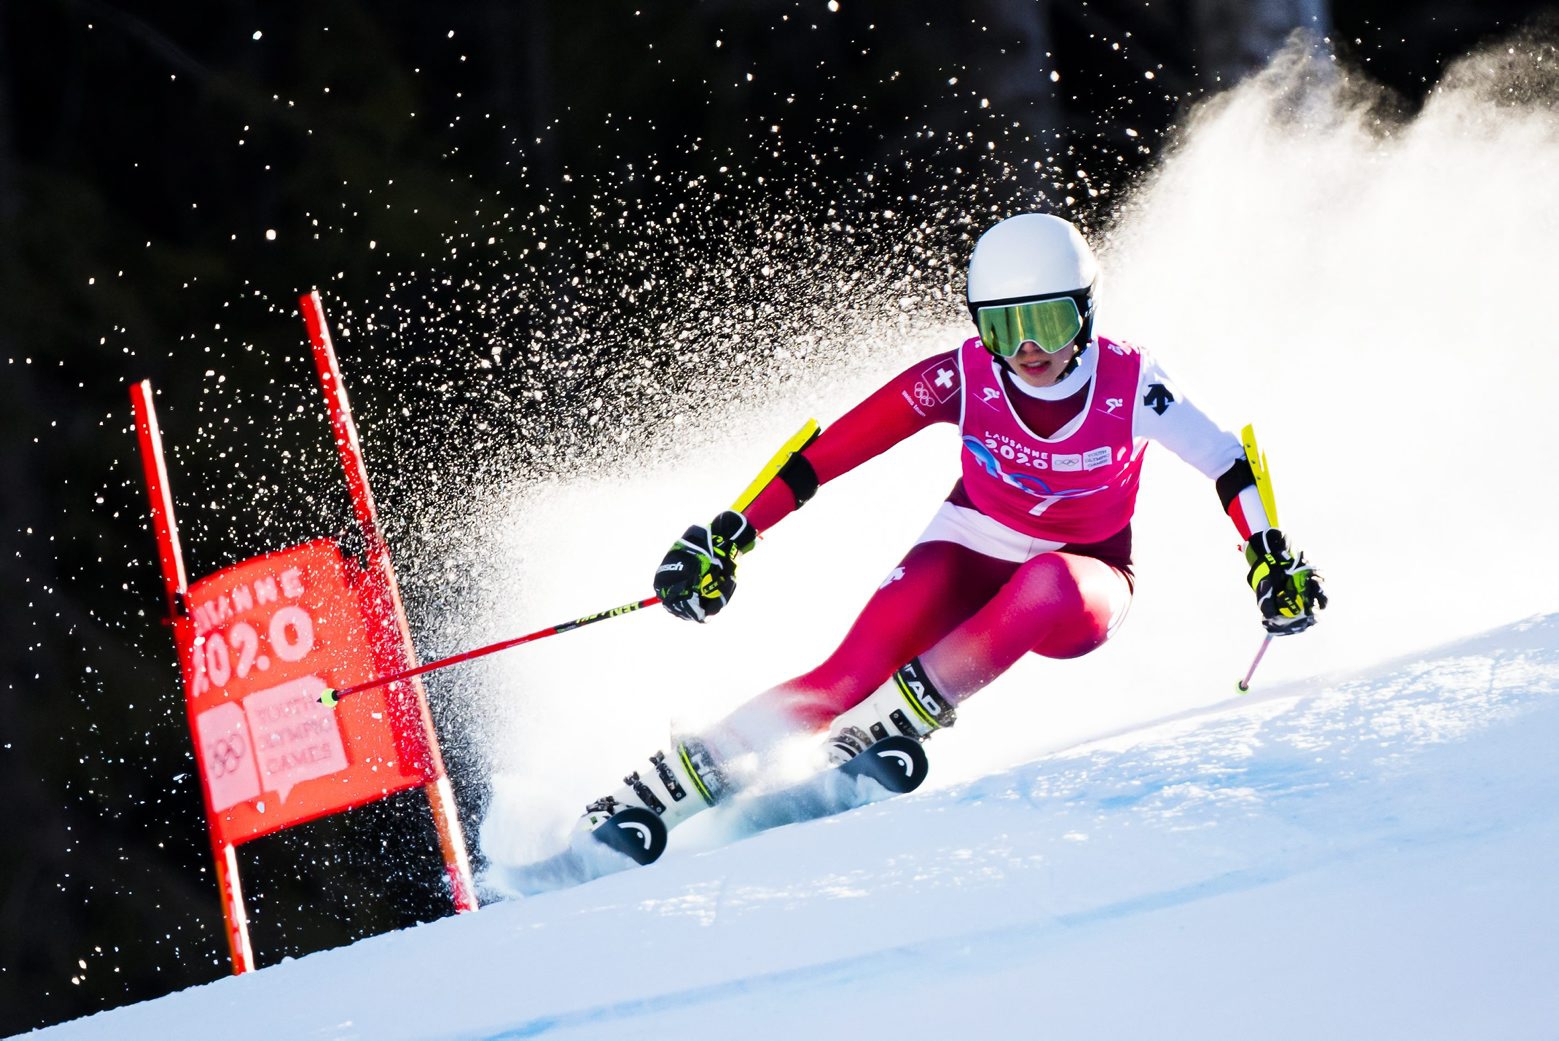 Gold medalist Amelie Klopfenstein from Switzerland in action during the second run of the women's Giant Slalom race of the alpine skiing event at the Lausanne 2020 Winter Youth Olympic Games, in Les Diablerets, Switzerland, Sunday, January 12, 2020. The 3rd Winter Youth Olympic Games will take place in Lausanne from 9 to 22 January 2020. (KEYSTONE/Jean-Christophe Bott) SWITZERLAND YOUTH OLYMPIC GAMES